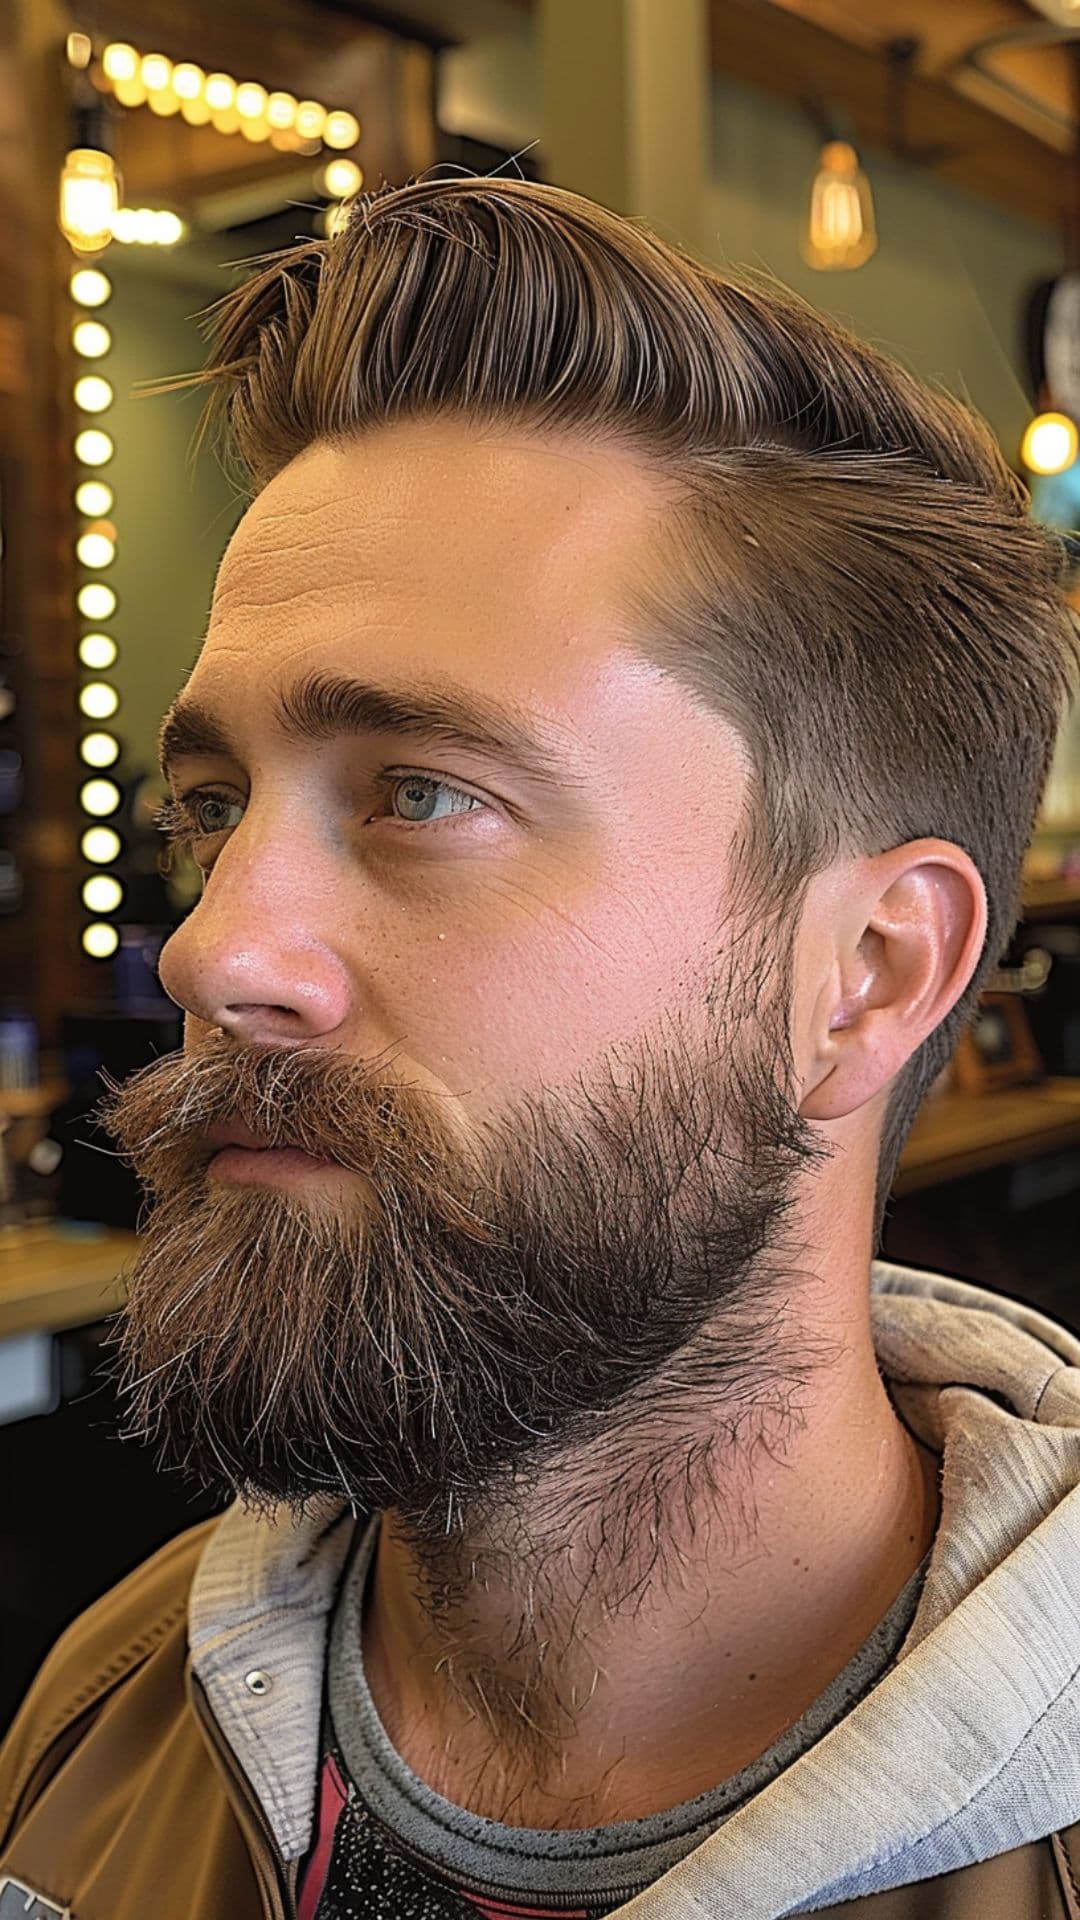 A man modelling a side part style with beard.